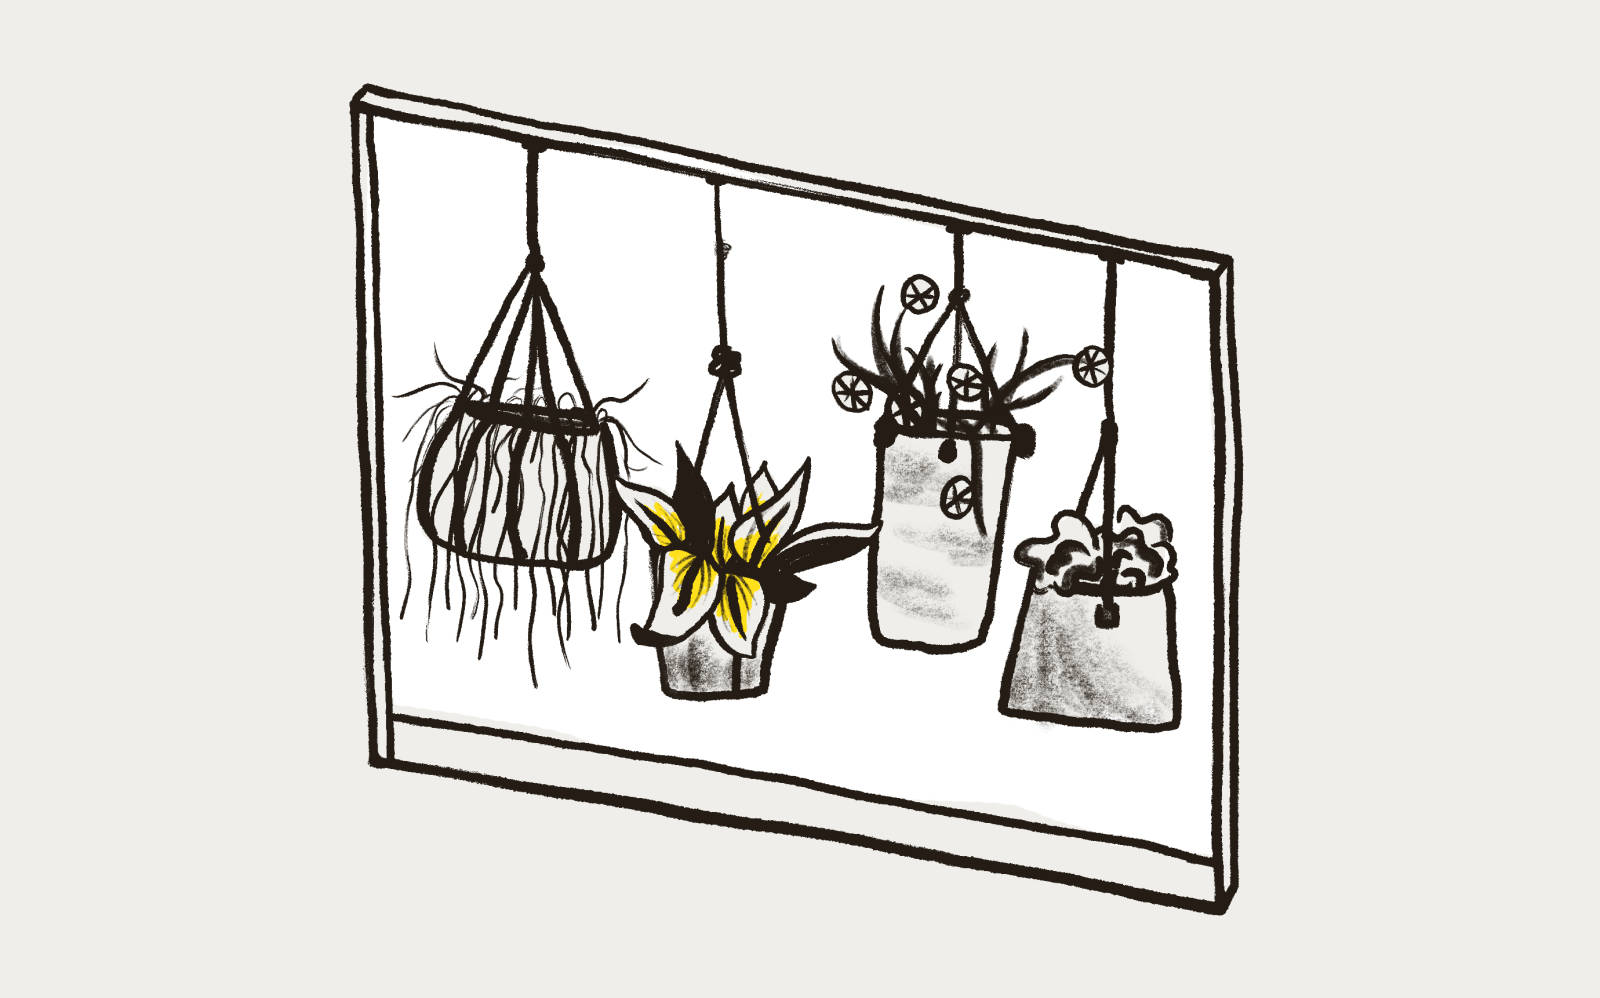 A window showing various hanging plants